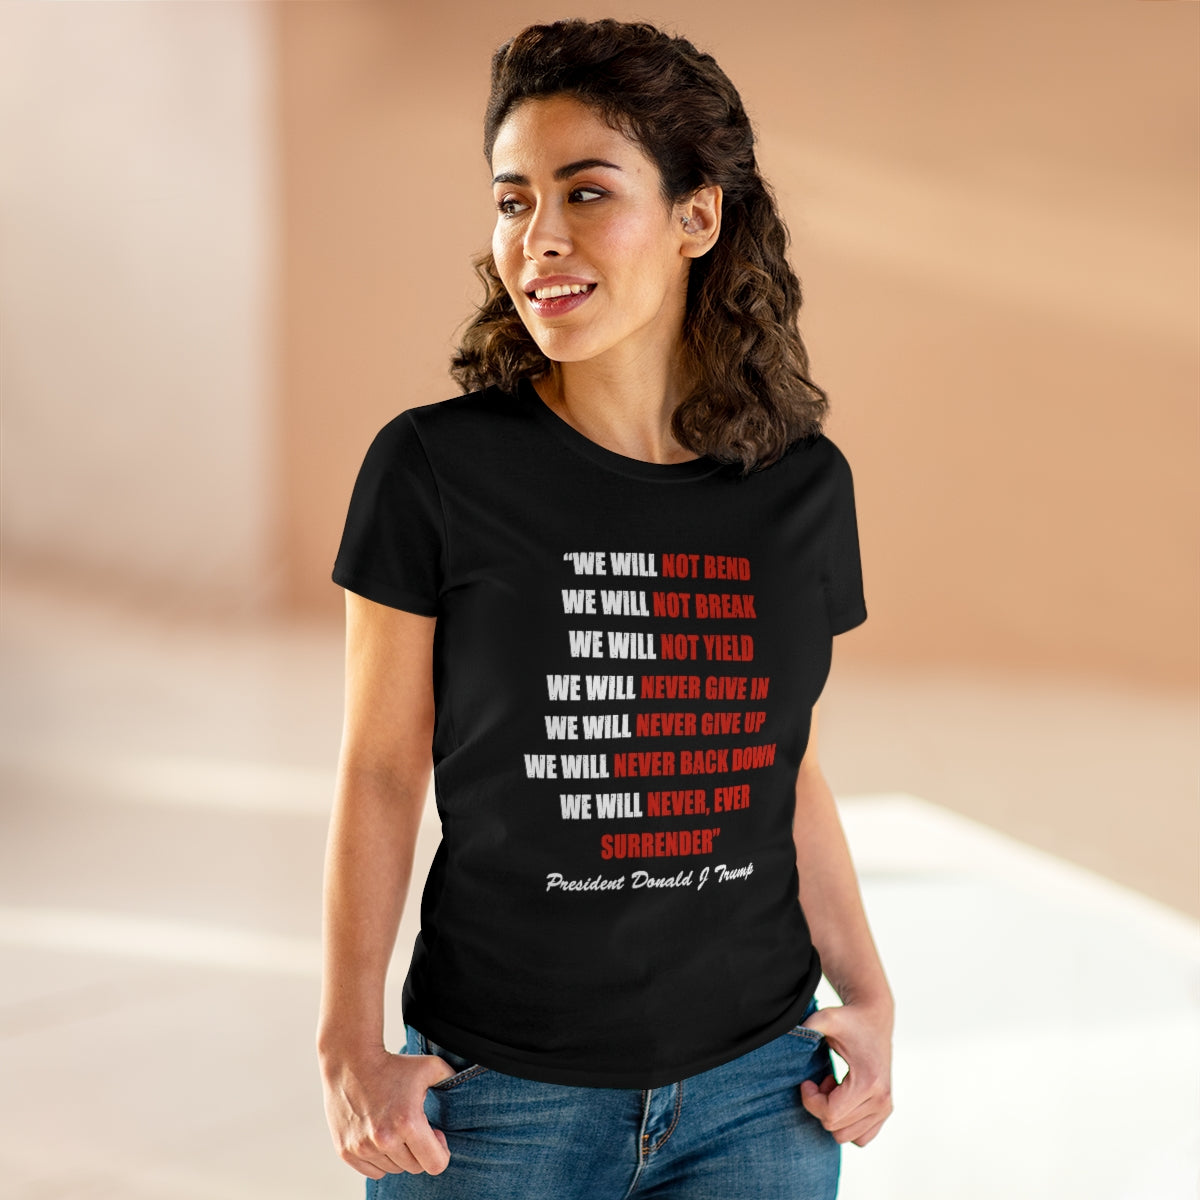 We Will Not Bend | Women's Tee - Rise of The New Media